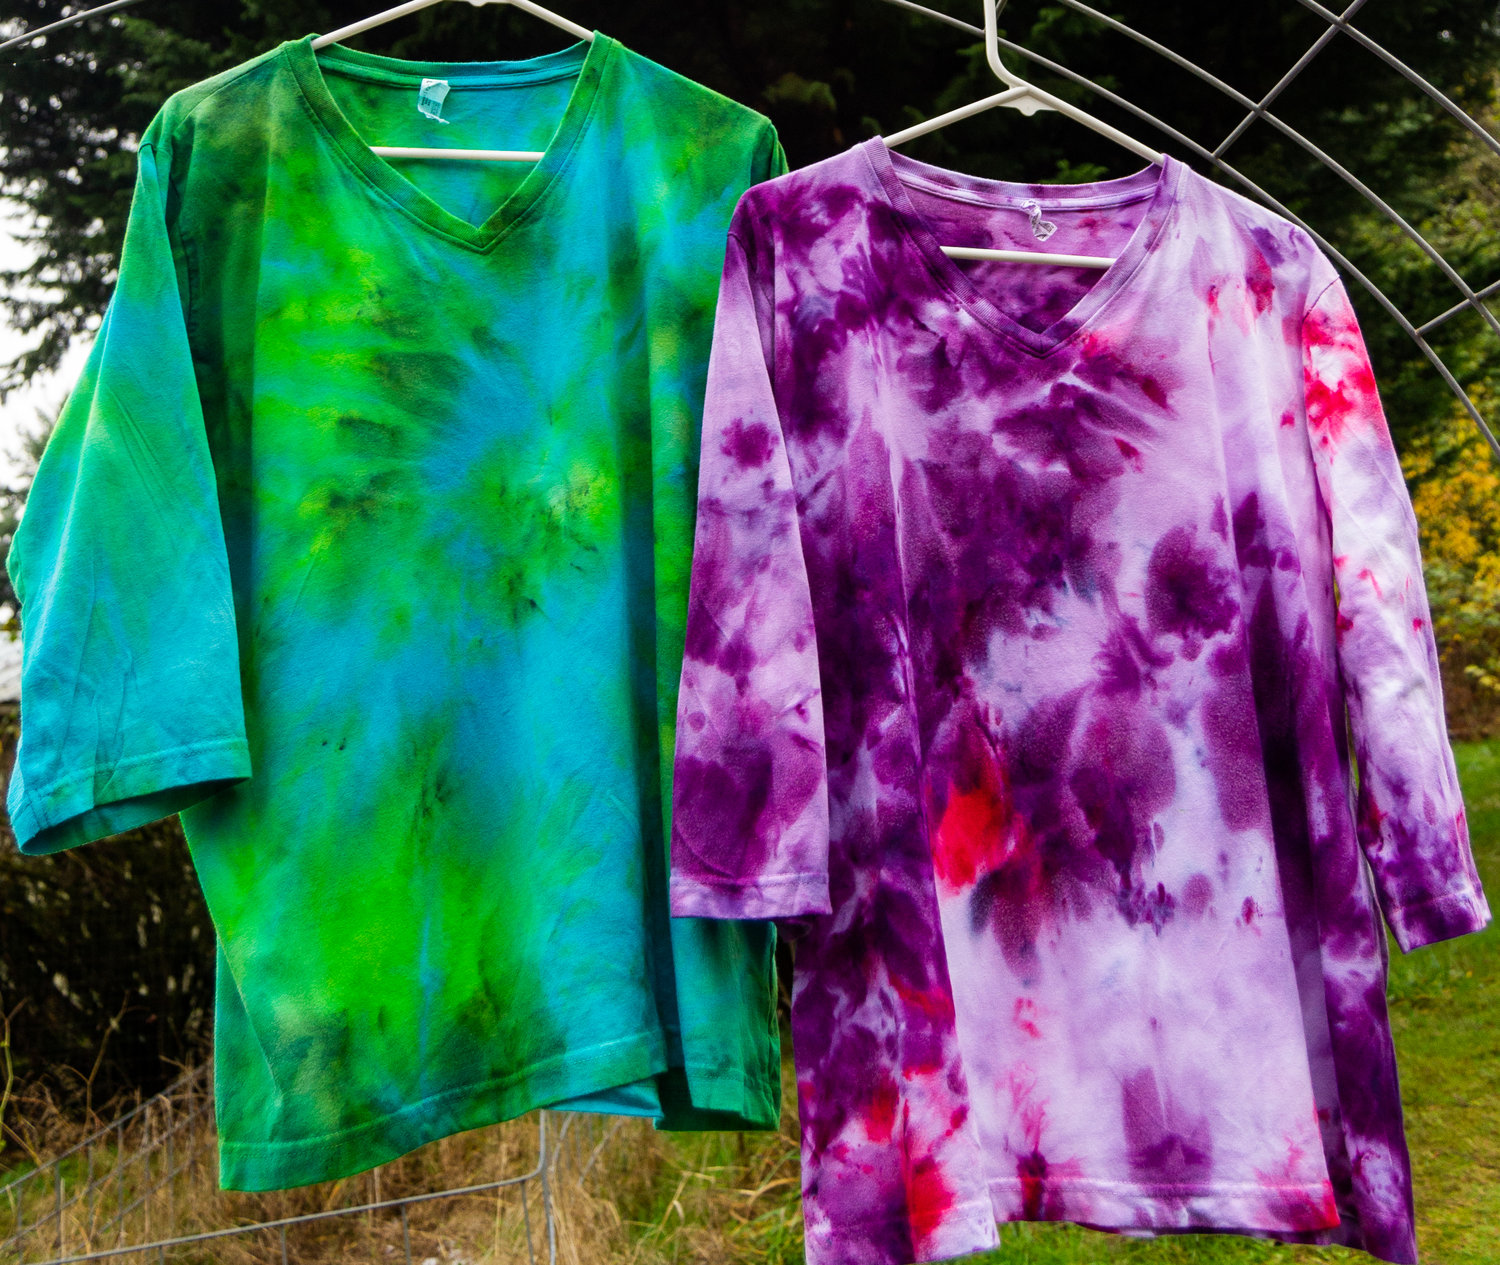 Washington rain dyed shirts by Miles of Dye Creations in Chehalis. The designs on these unique offerings are created by leaving the shirt in the rain. Each one comes with a certificate of authenticity with the date of the rain storm.